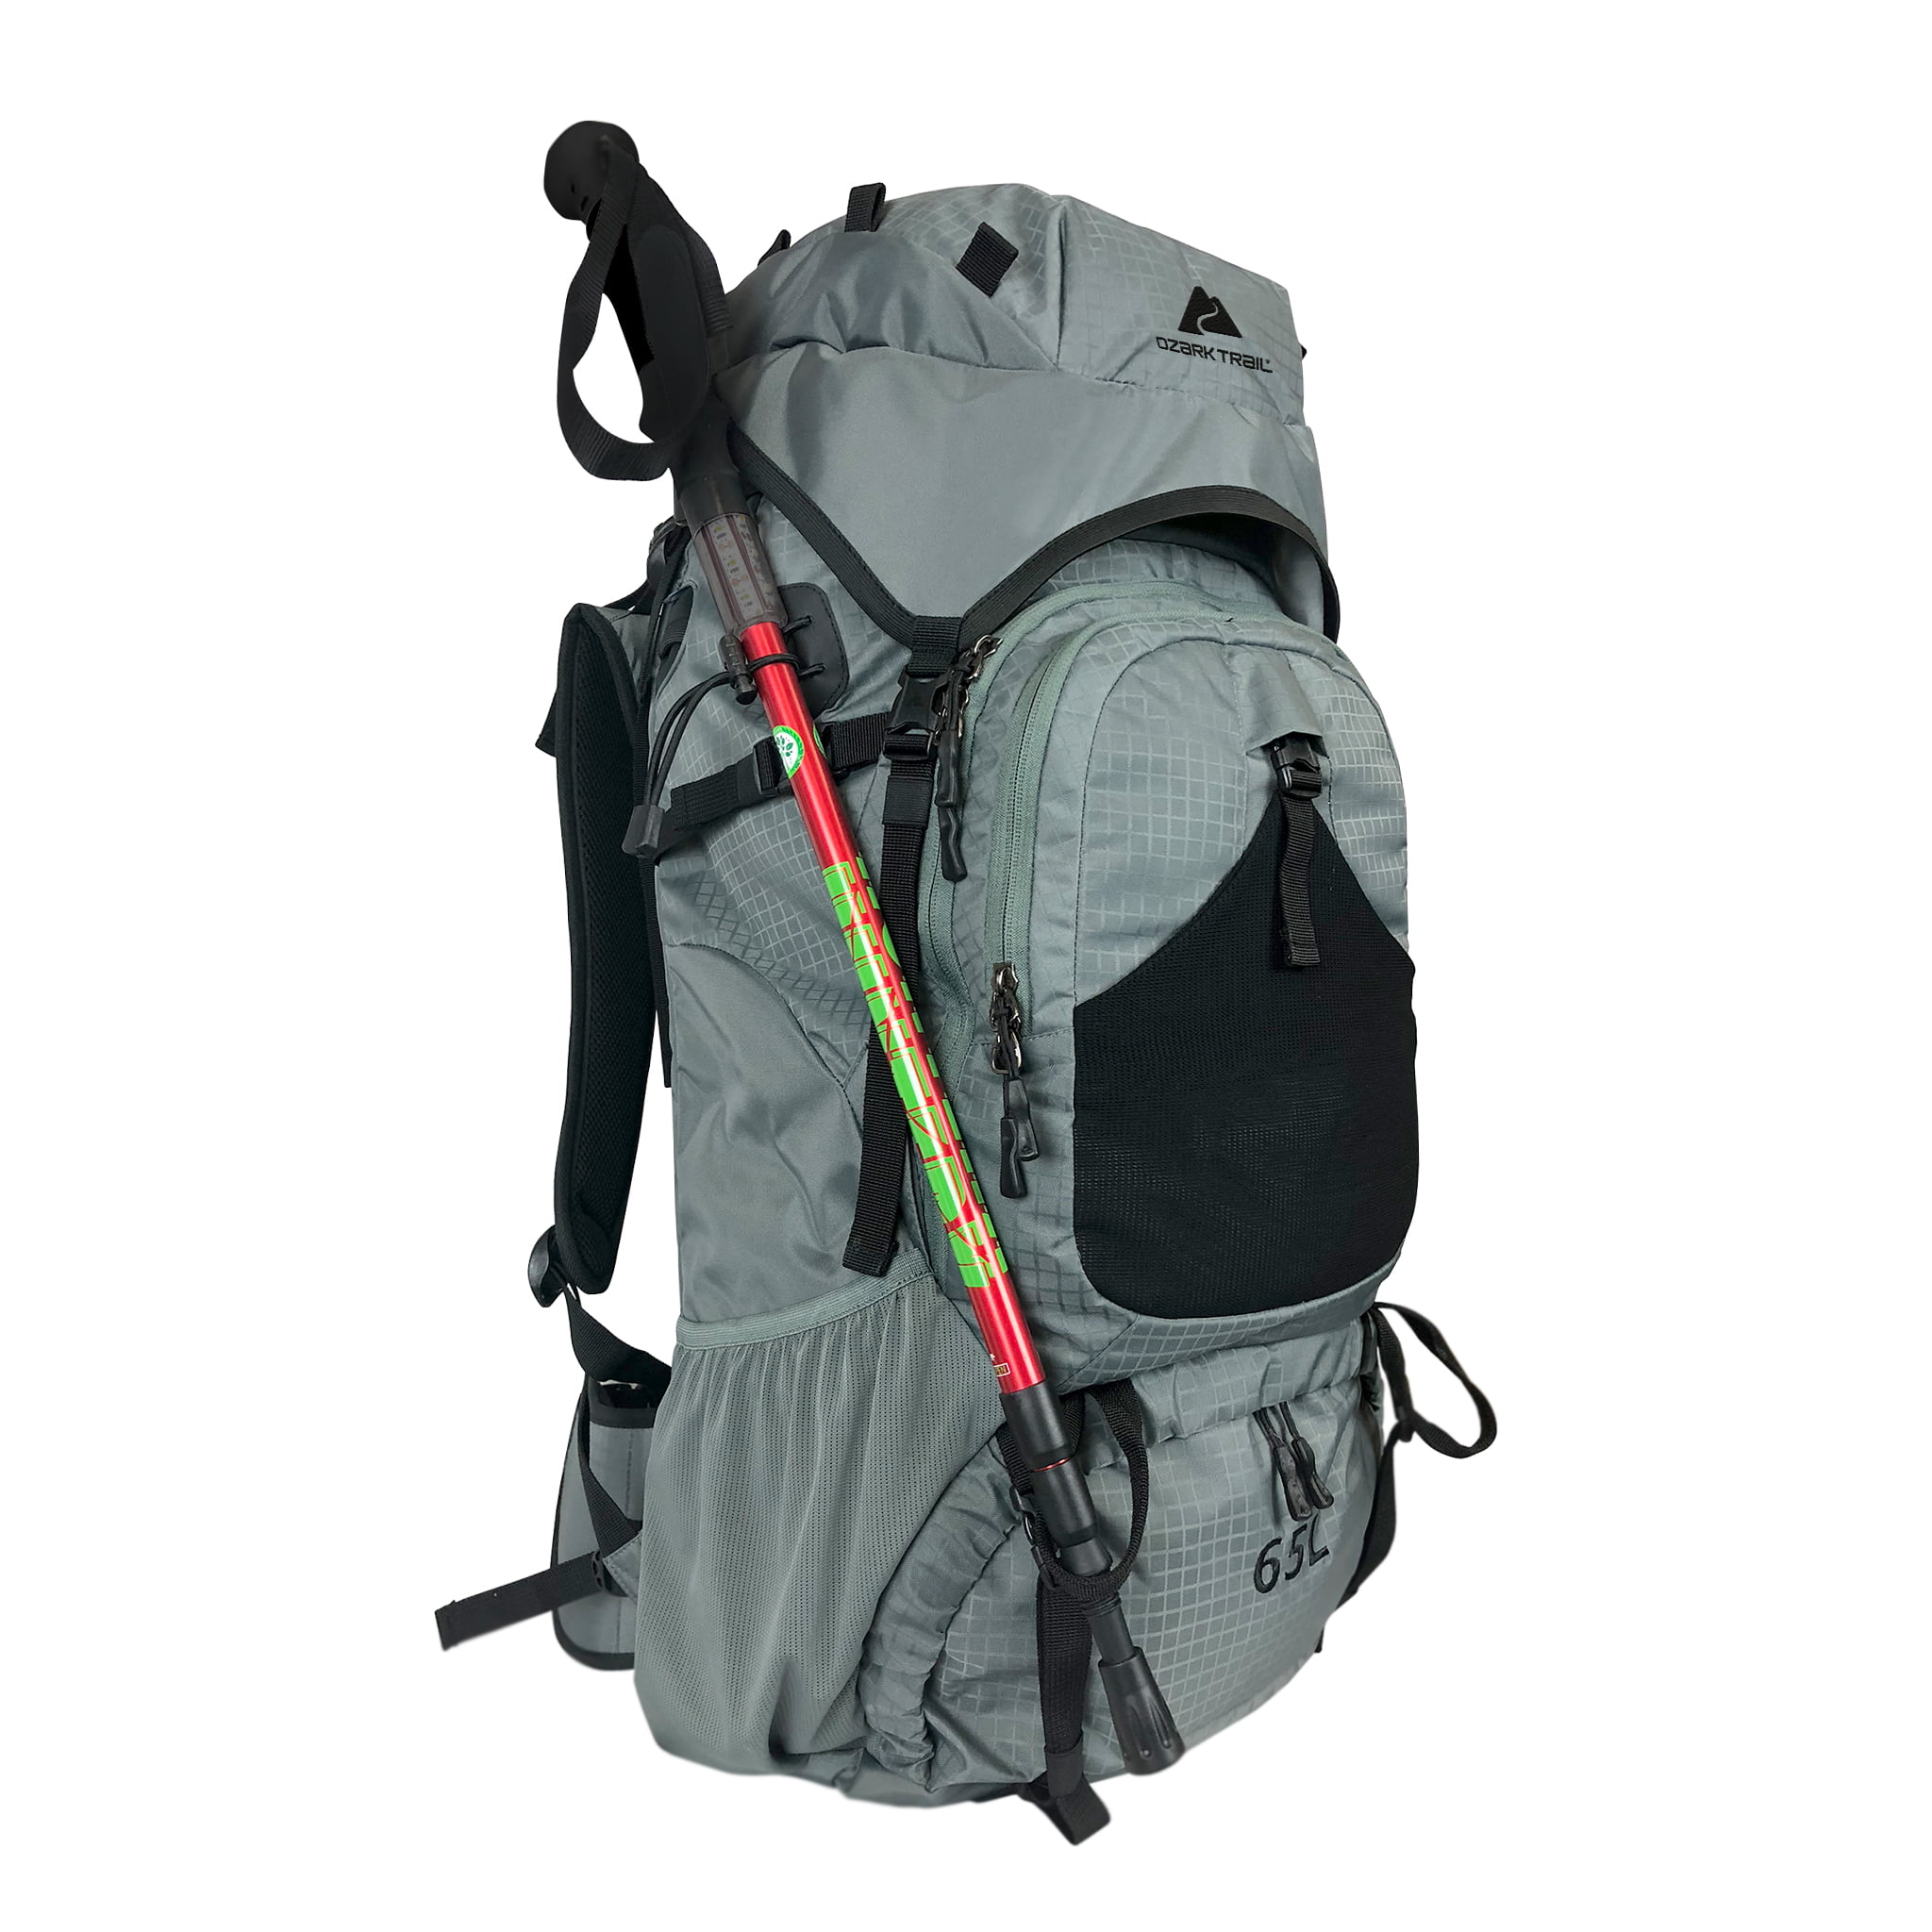 attaching trekking pole to backpack